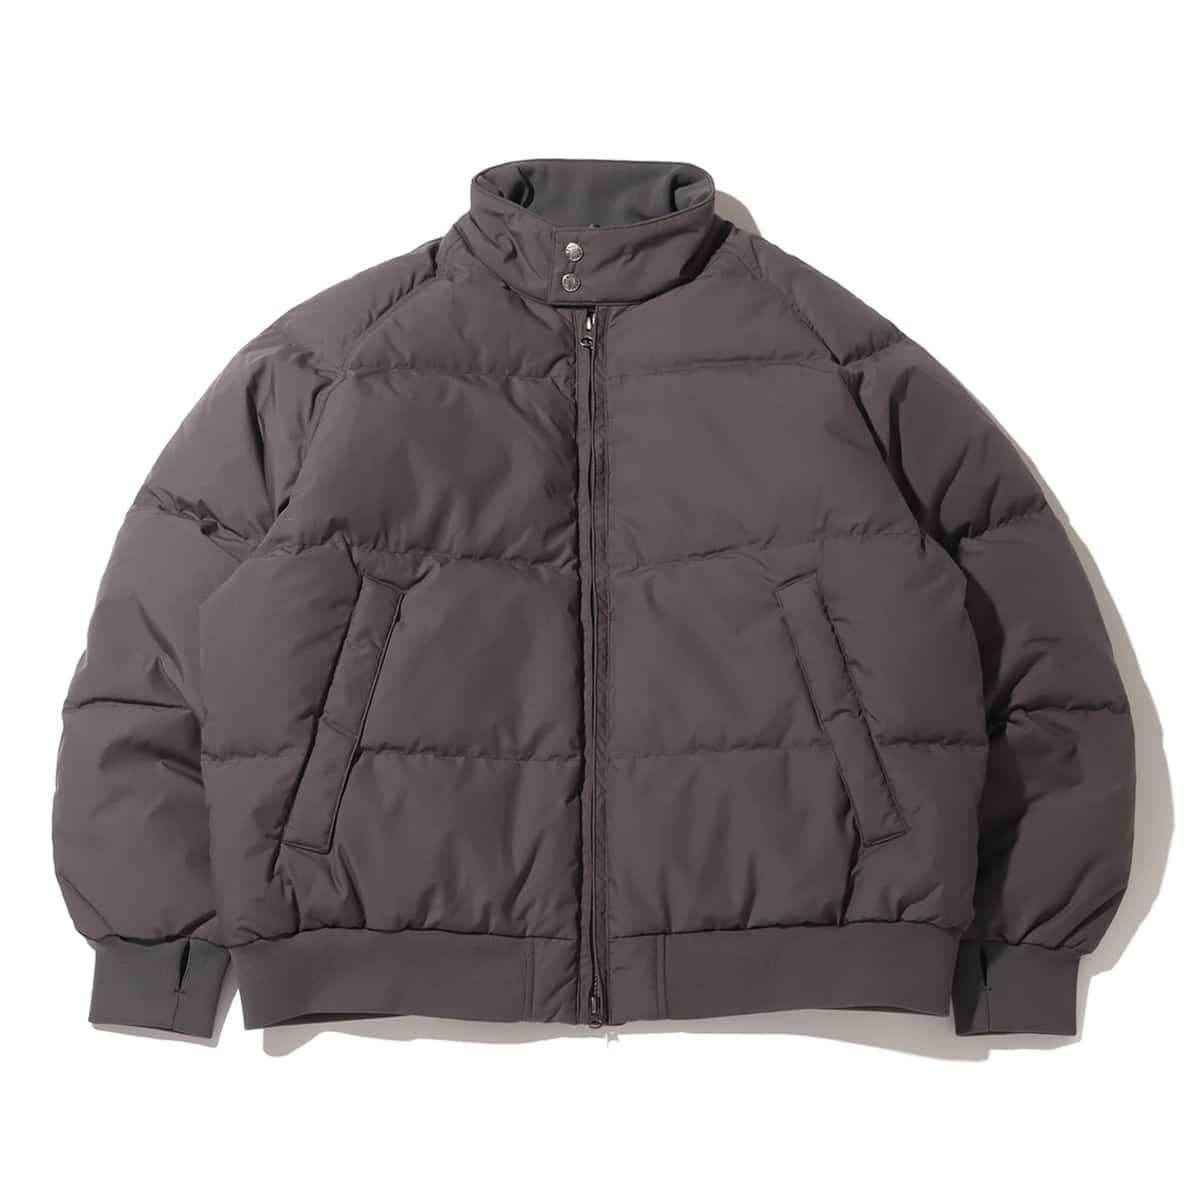 THE NORTH FACE 65/35 Field Down Jacket | www.gamutgallerympls.com